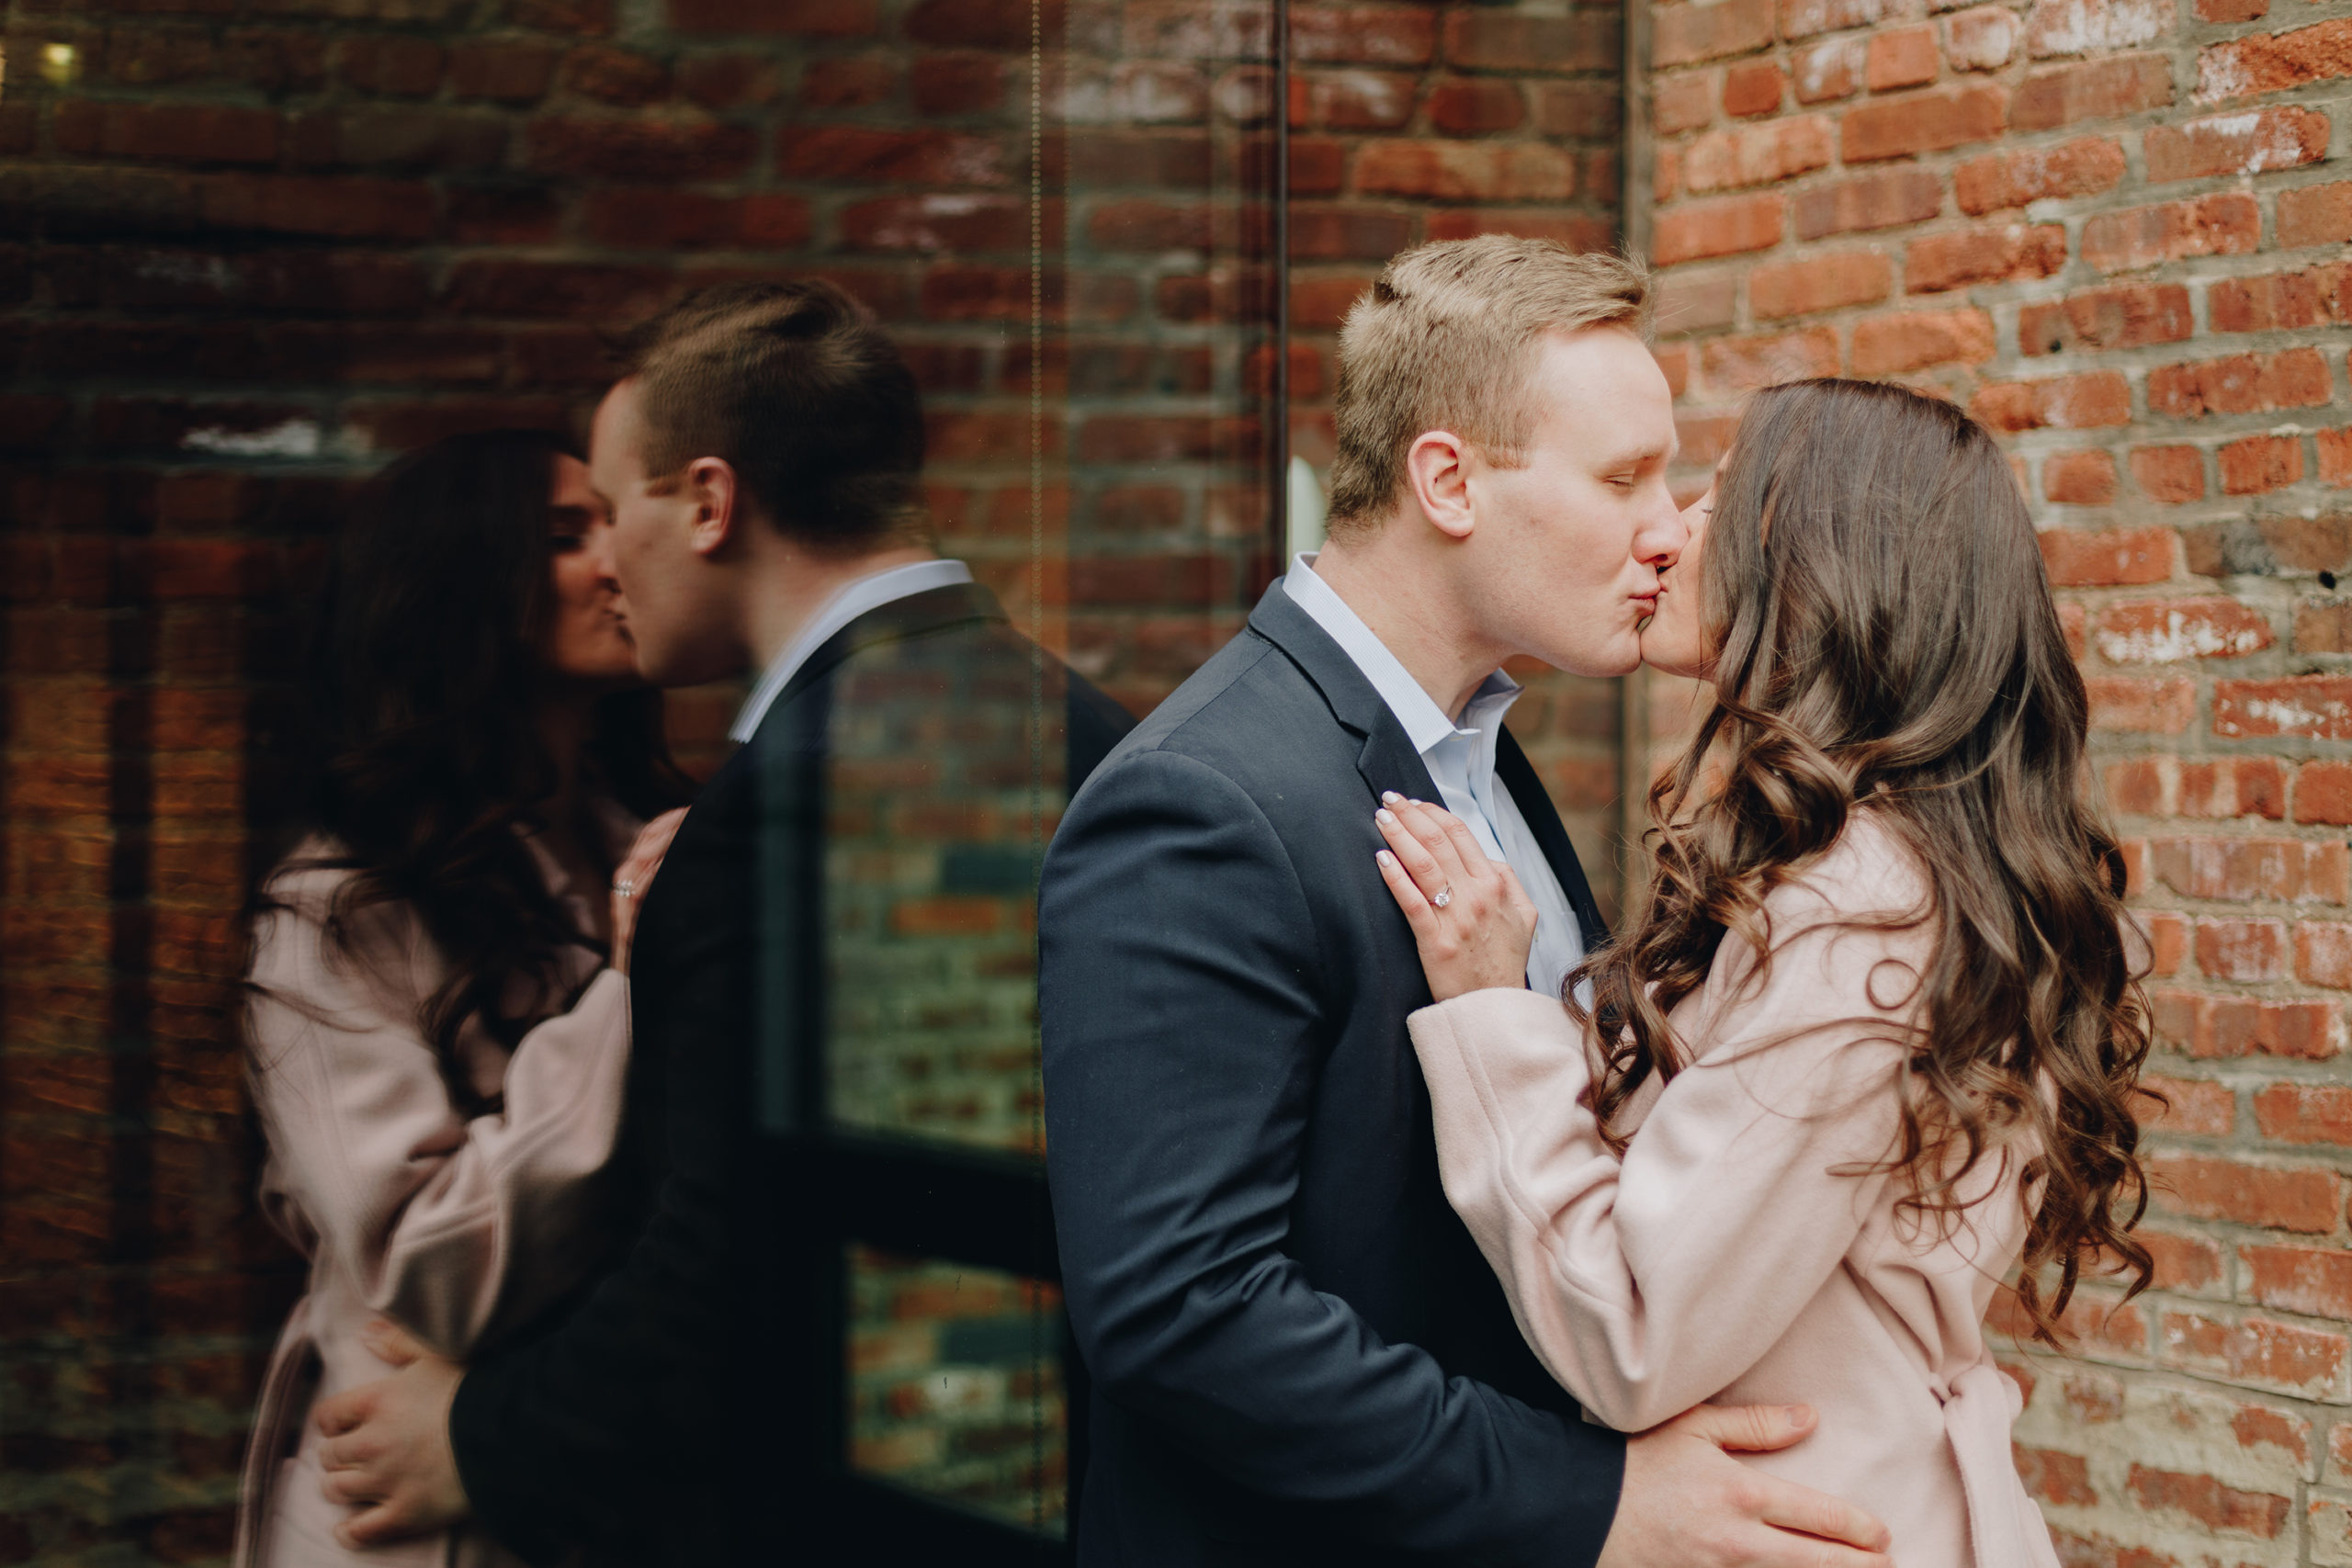 Romantic Dumbo Engagement Photography in Brooklyn, NY